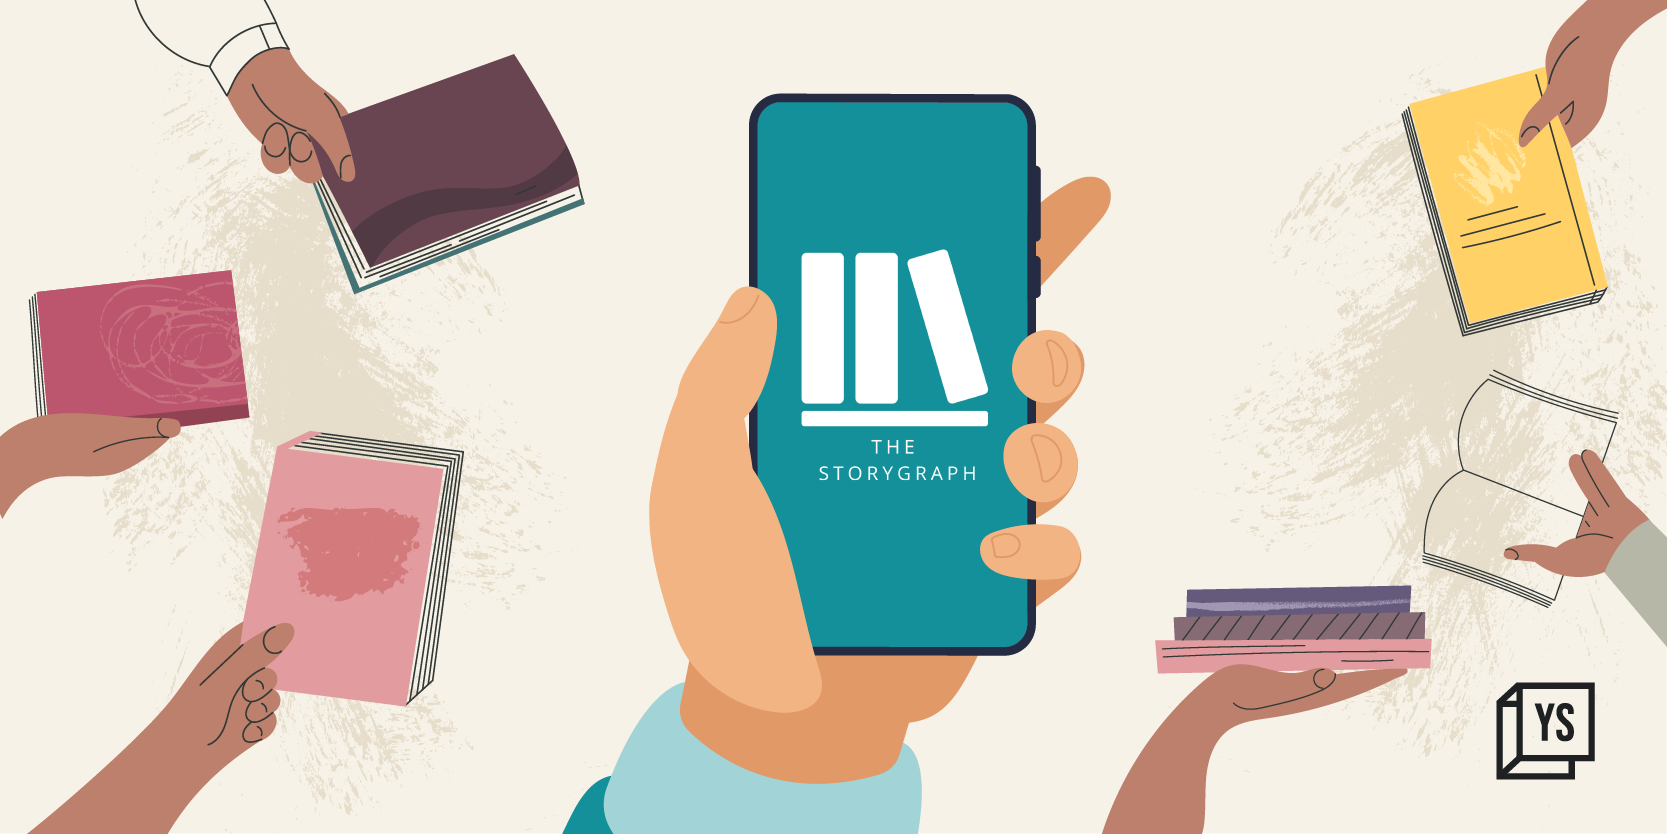 StoryGraph’s mood-based book recommendations help you find your next perfect read